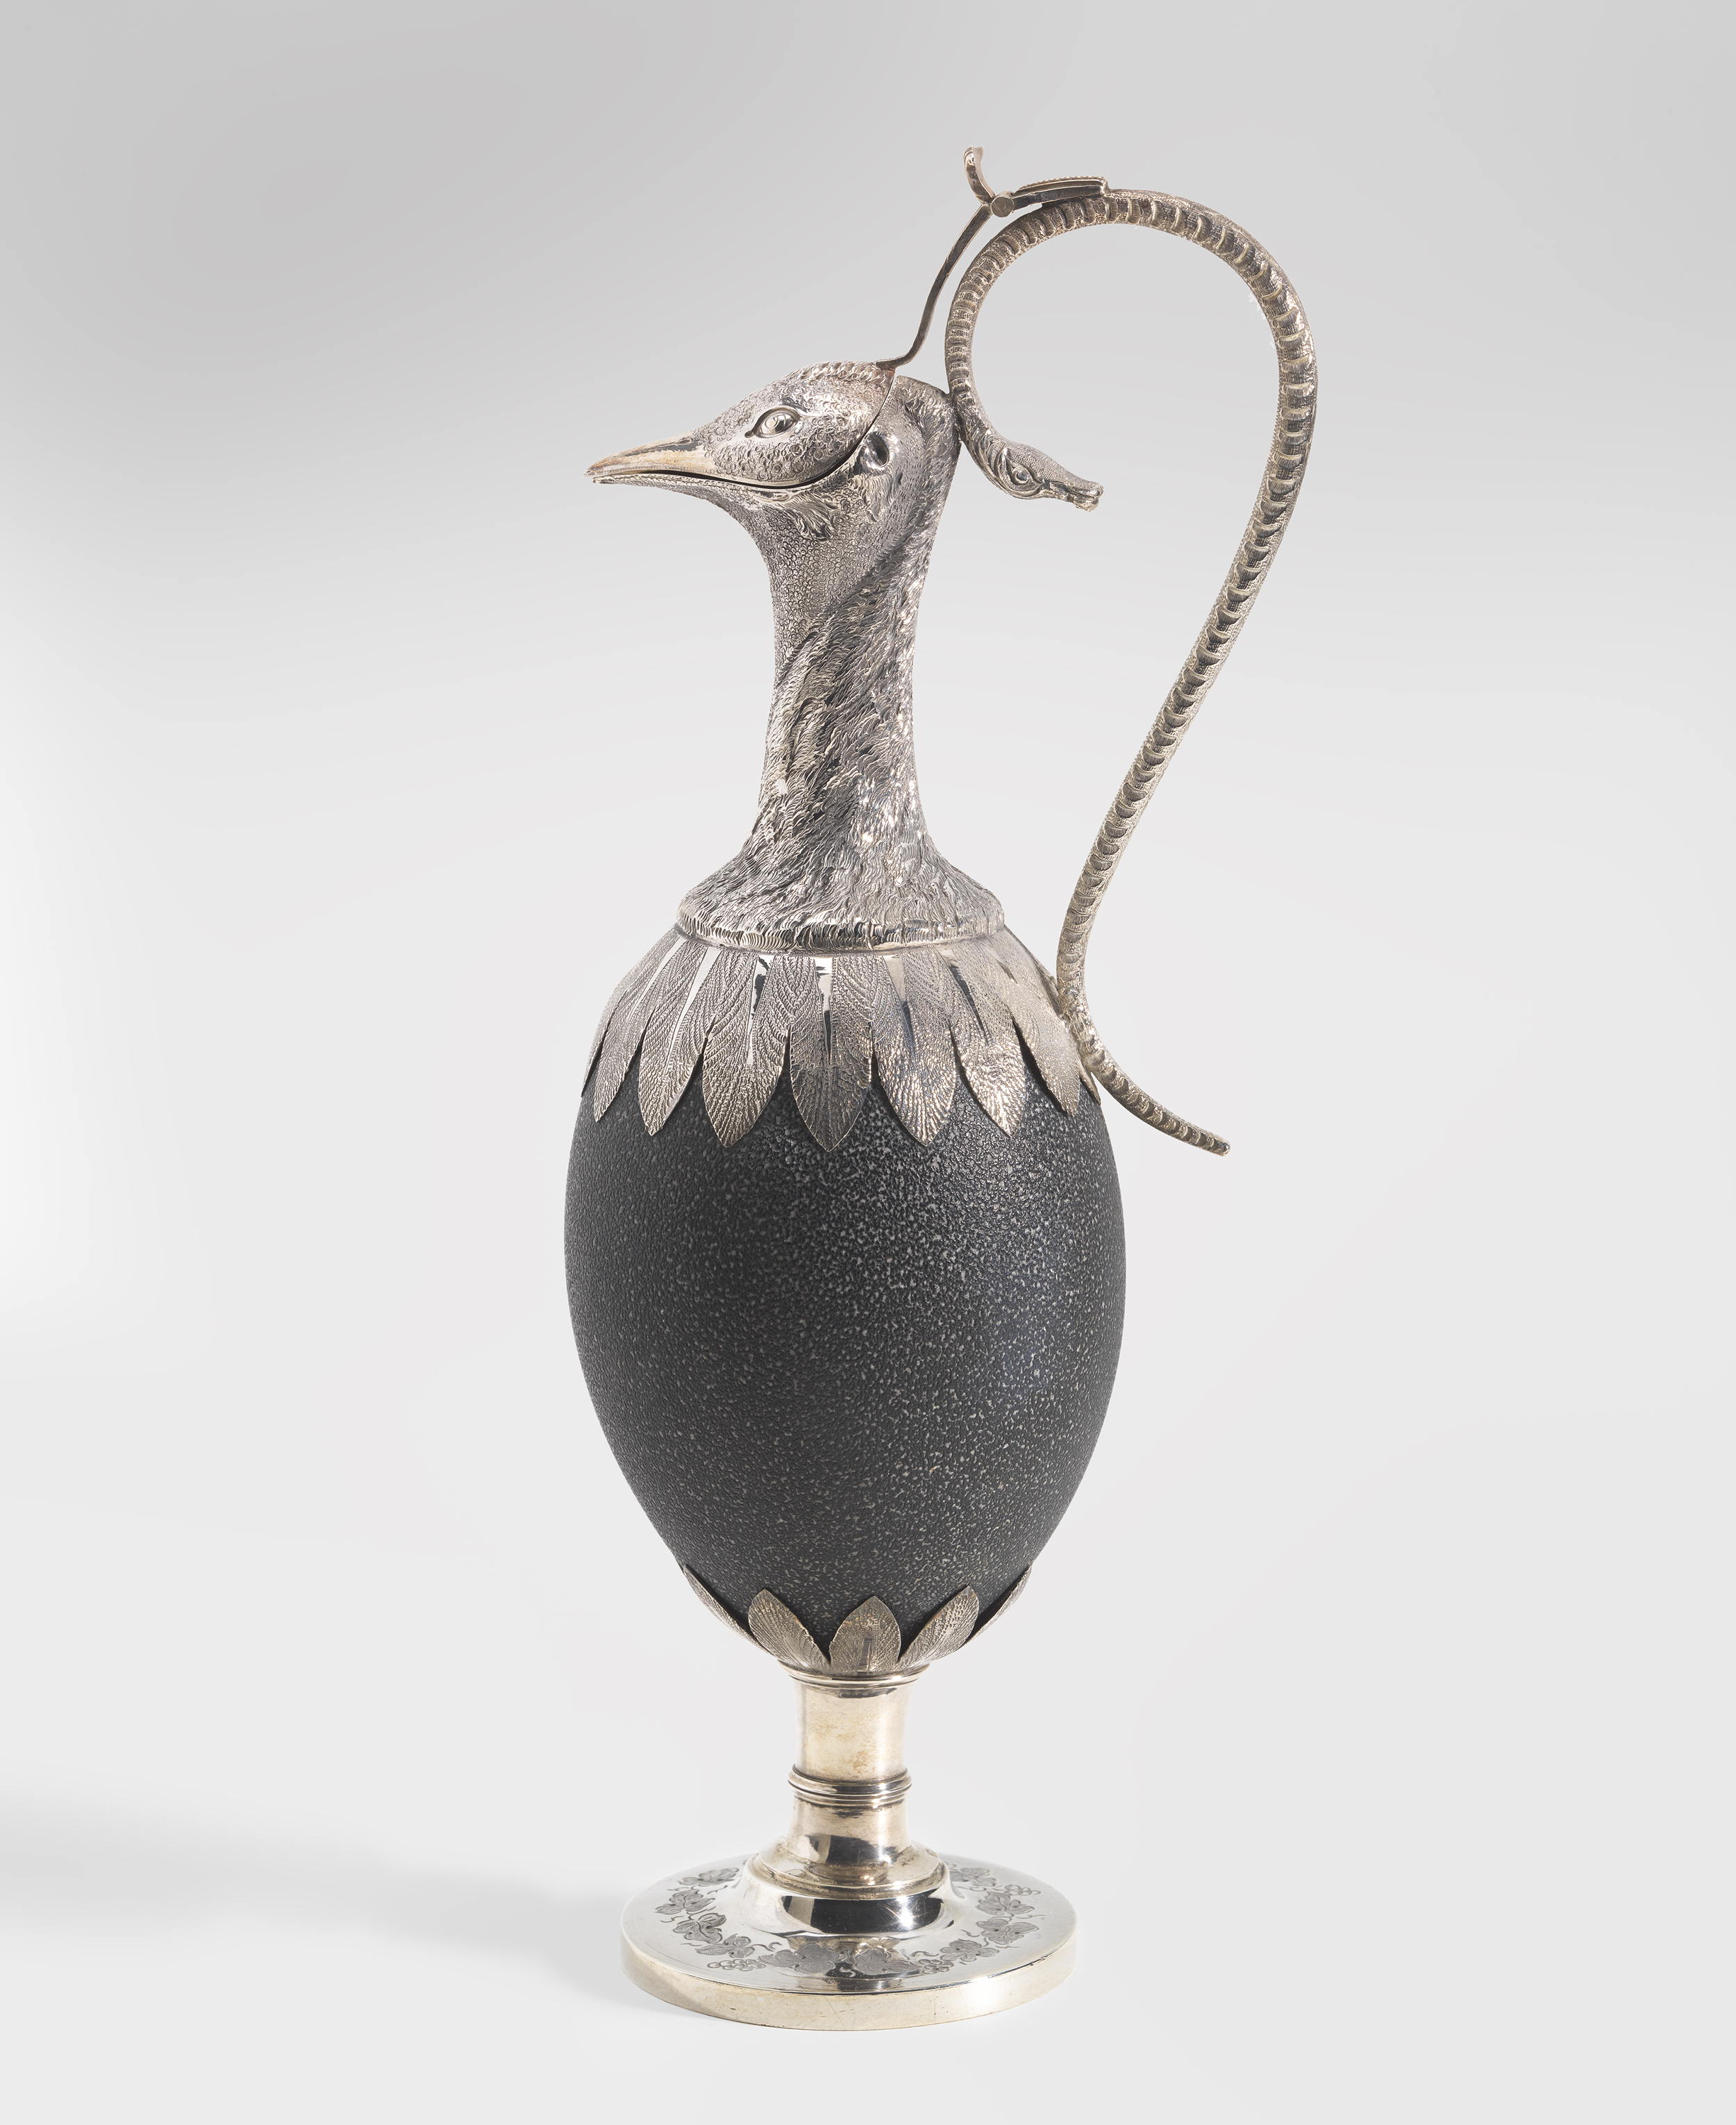   Henry Steiner,&nbsp;  Emu egg claret jug &nbsp;c.1875, sterling silver: raised,stamped, repousse, chased; emu egg: mounted. National Gallery of Australia, Canberra.&nbsp;Purchased 2014 